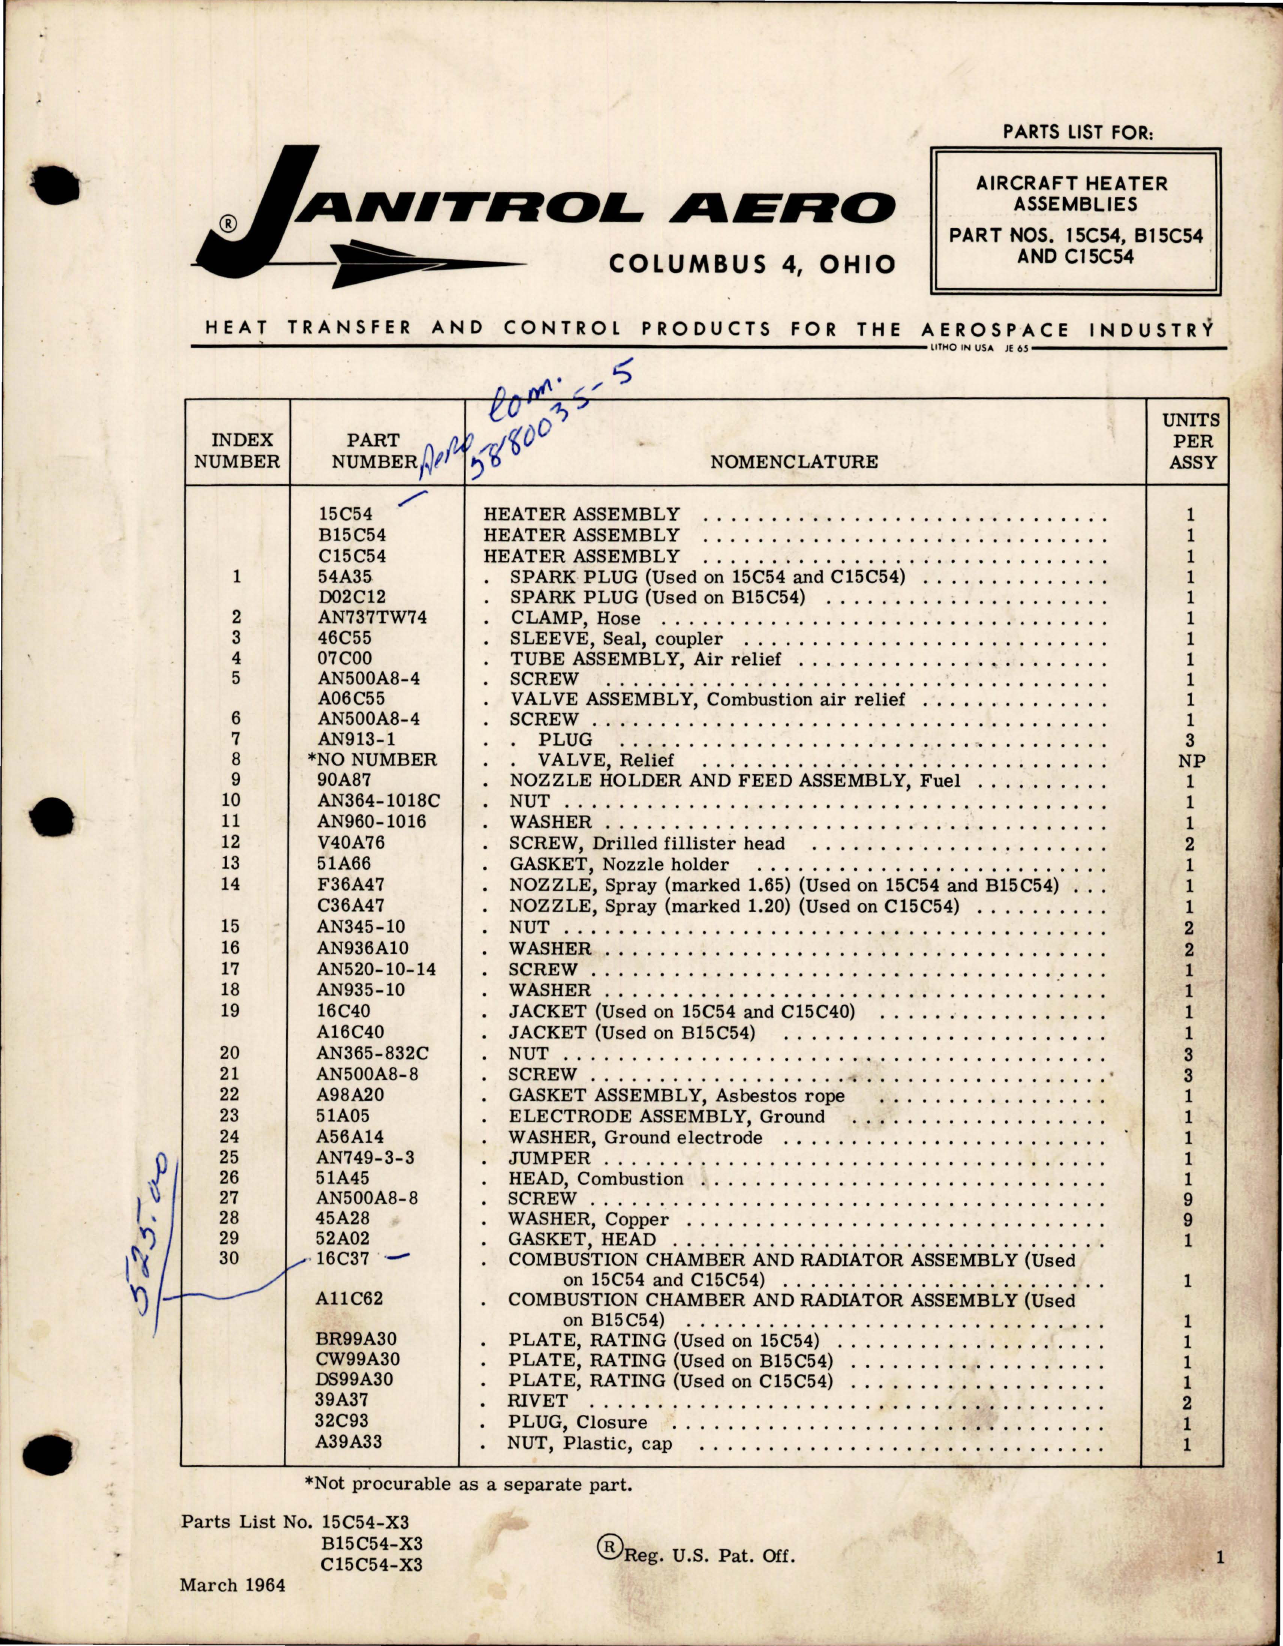 Sample page 1 from AirCorps Library document: Parts List for Aircraft Heater Assemblies - Parts 15C54, B15C54, and C15C54 